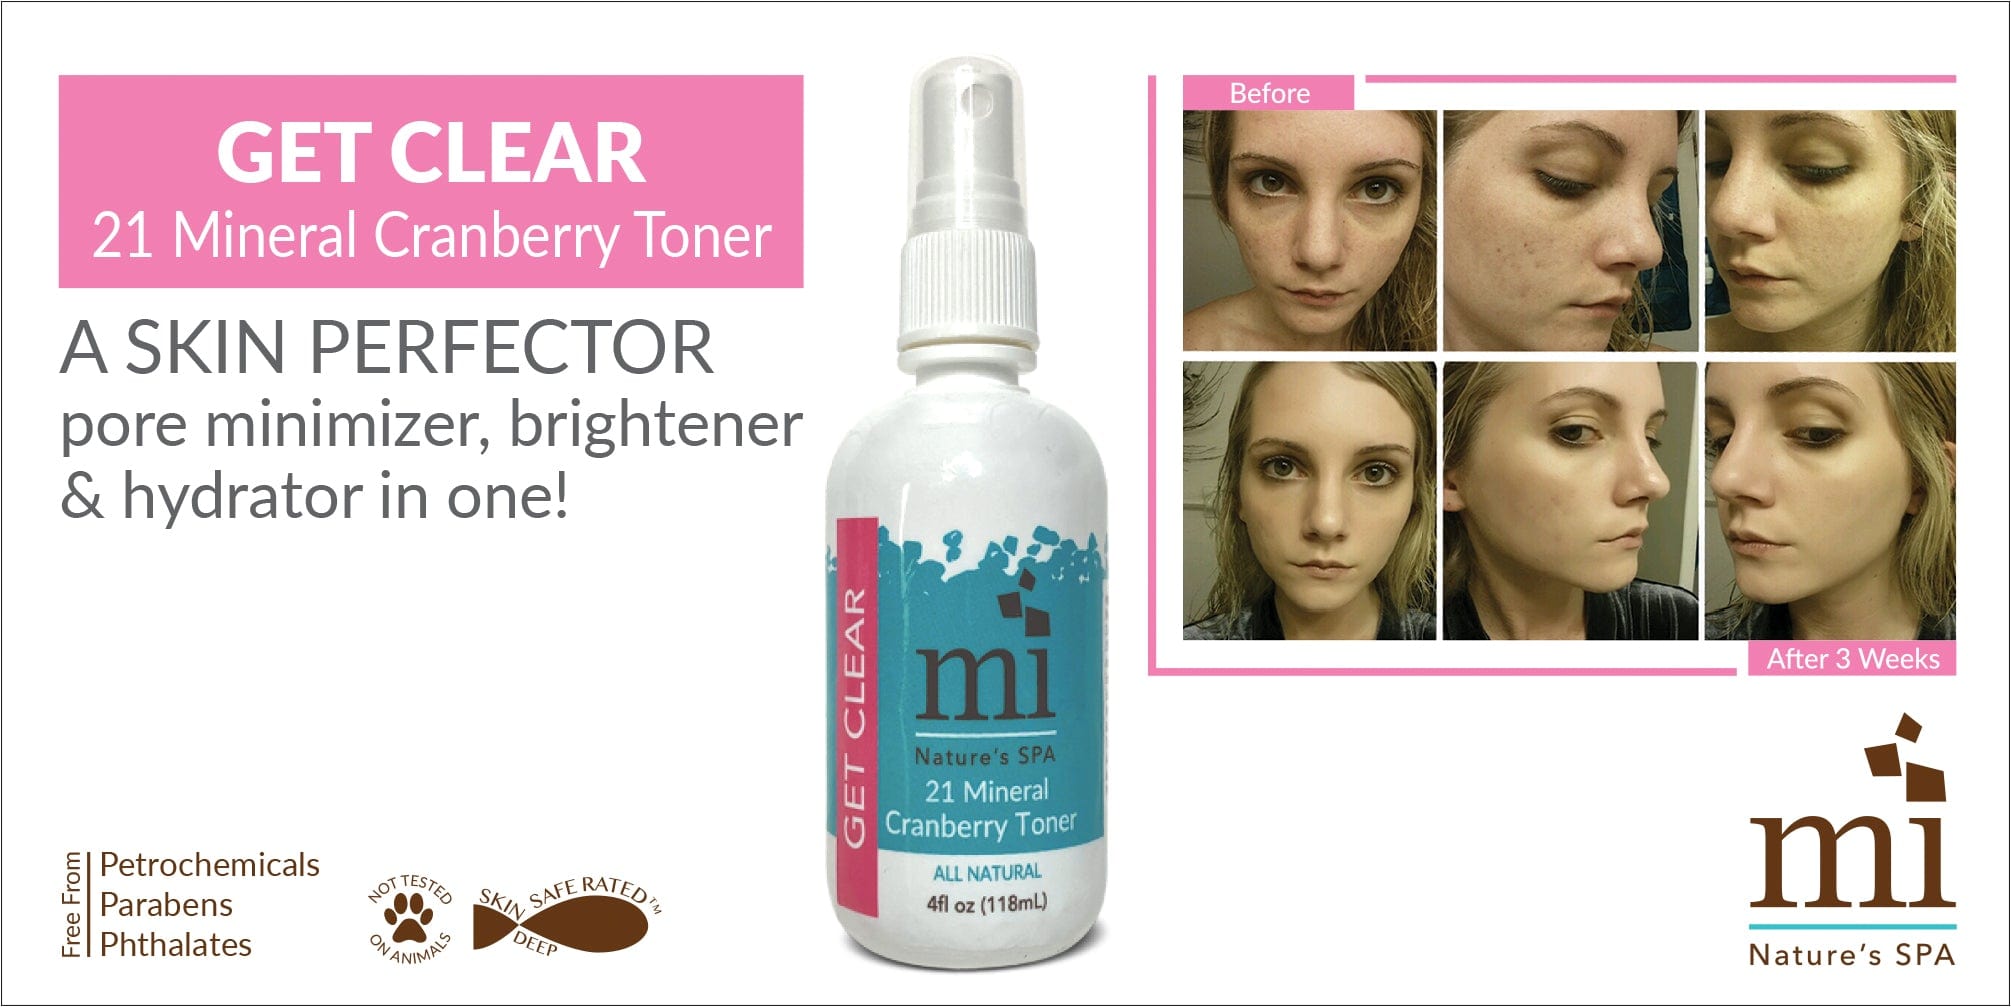 21 Mineral Cranberry toner By Mindful Minerals